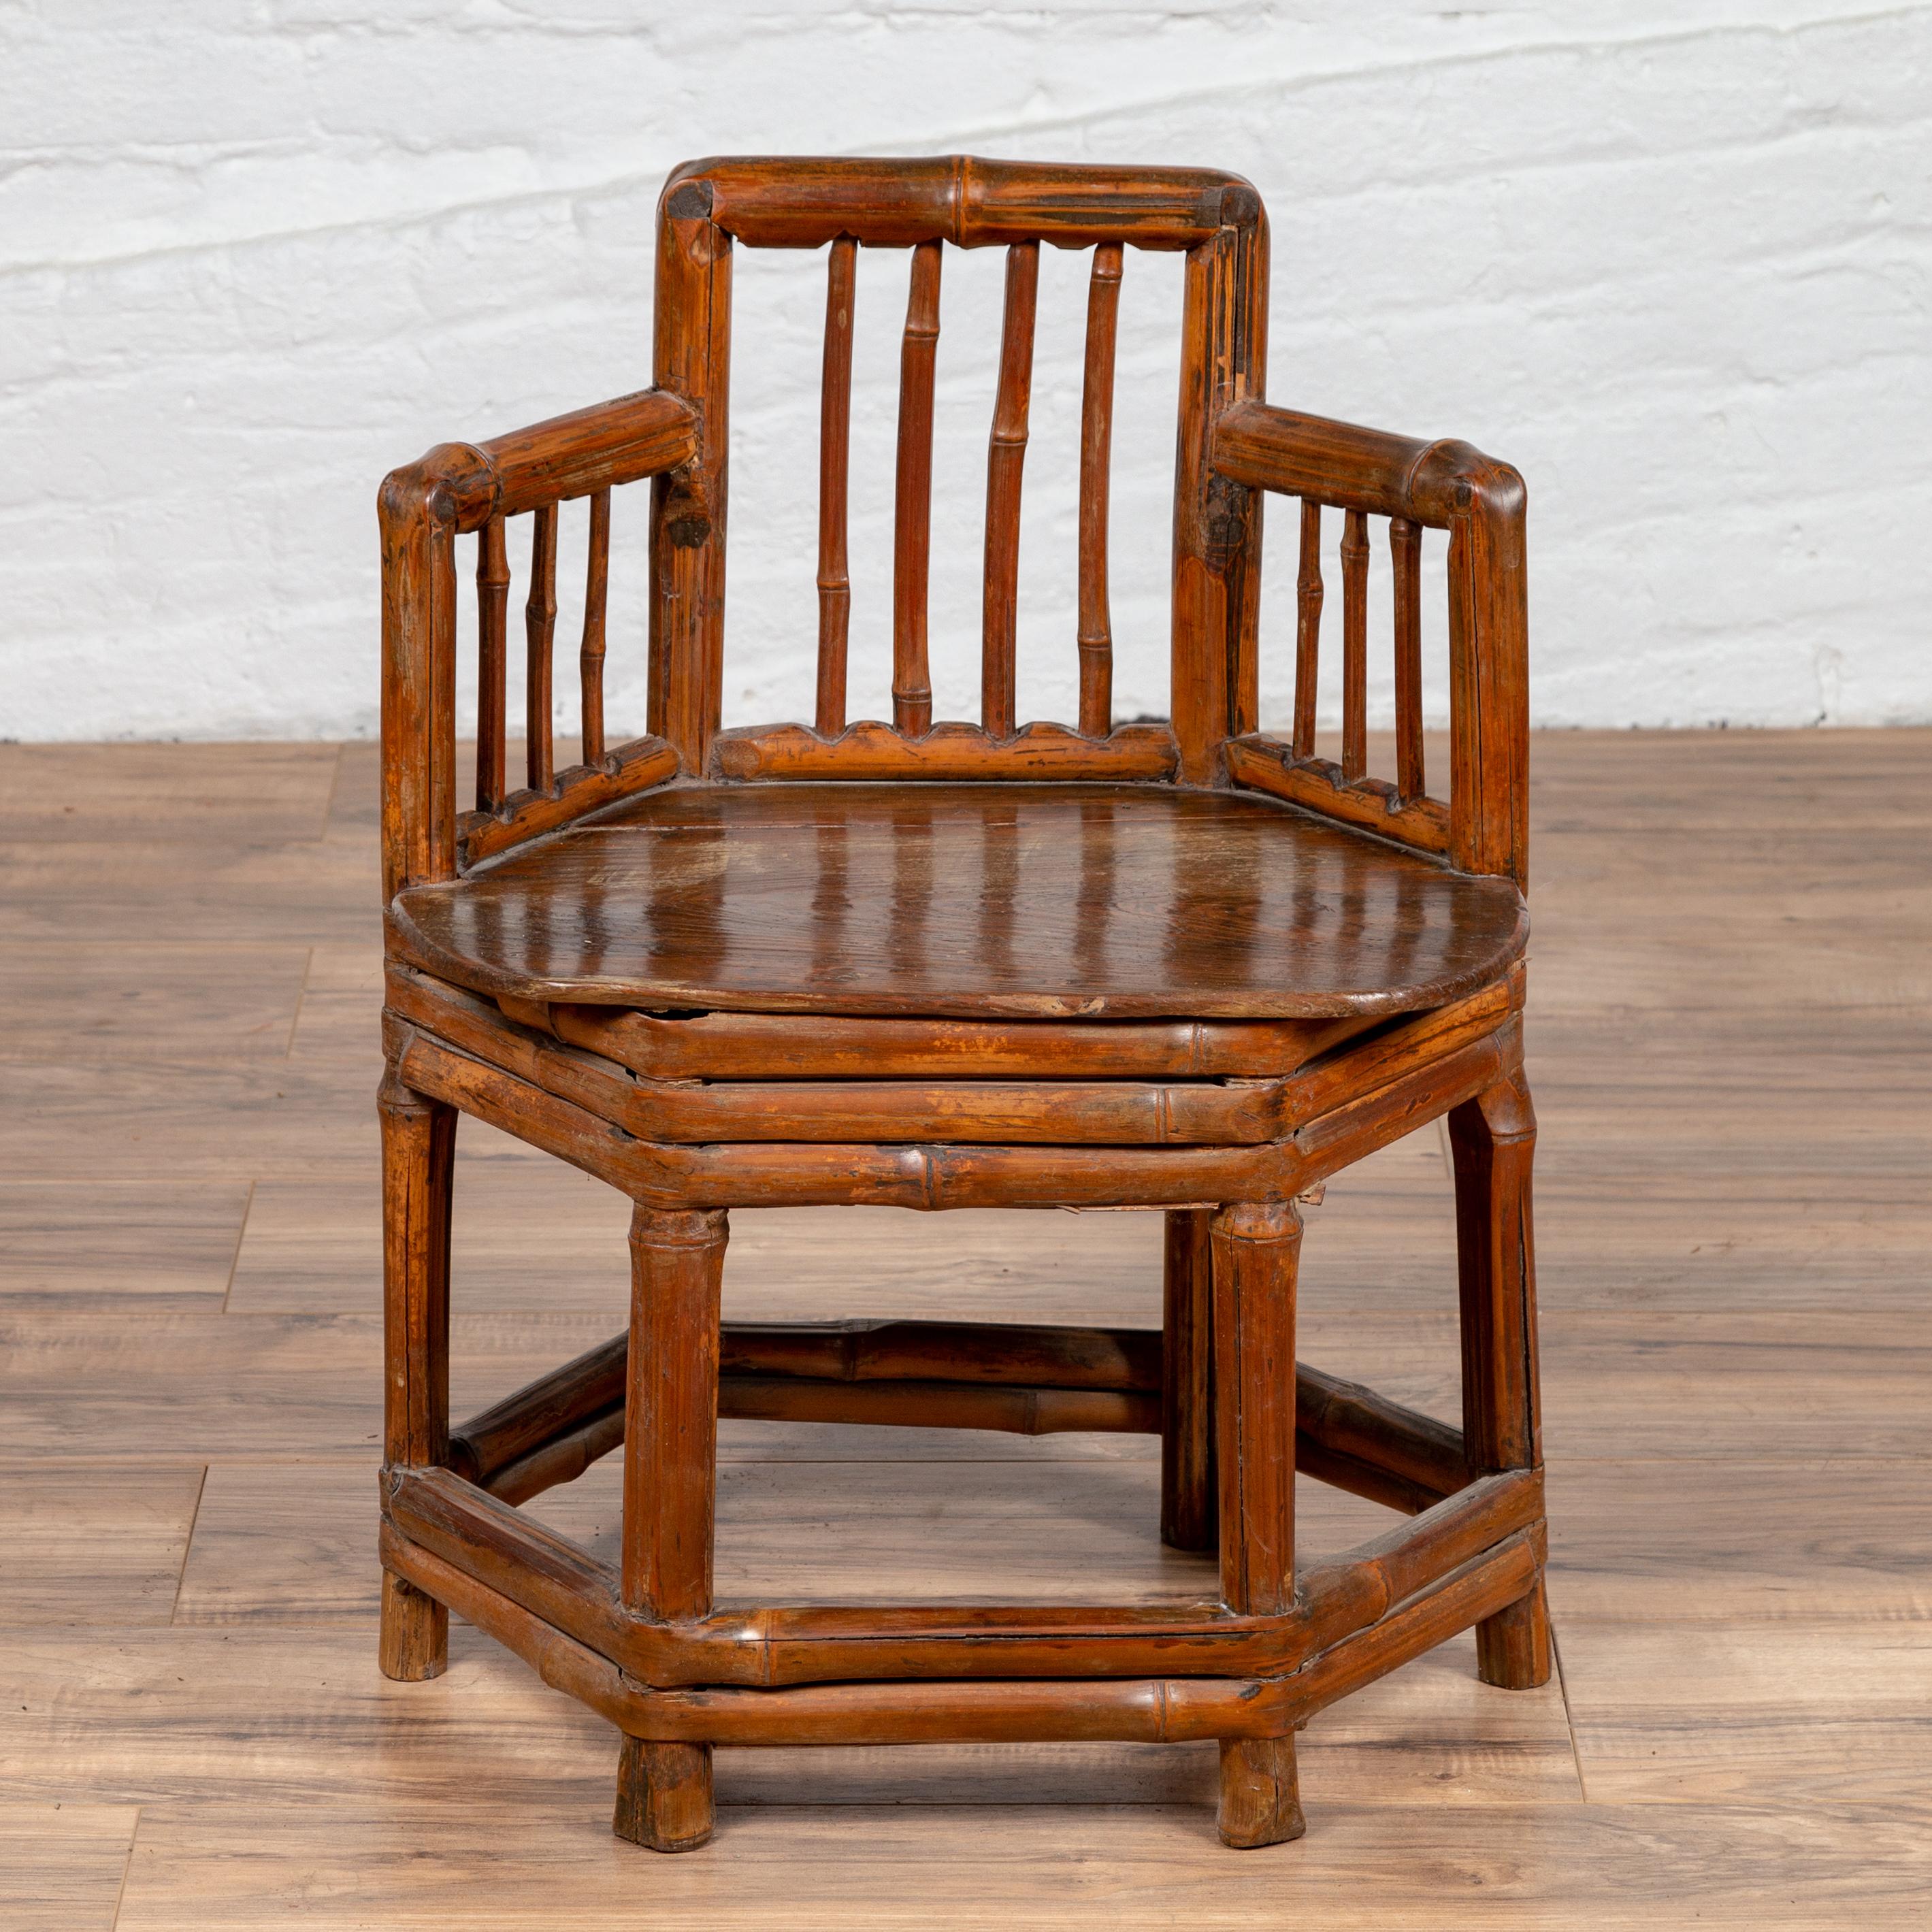 An antique Chinese child's corner chair from the 19th century, with bamboo frame and hexagonal base. Our hearts melt immediately upon inspection of this rustic child's corner chair! An hexagonal bamboo base made of straight legs connected to one